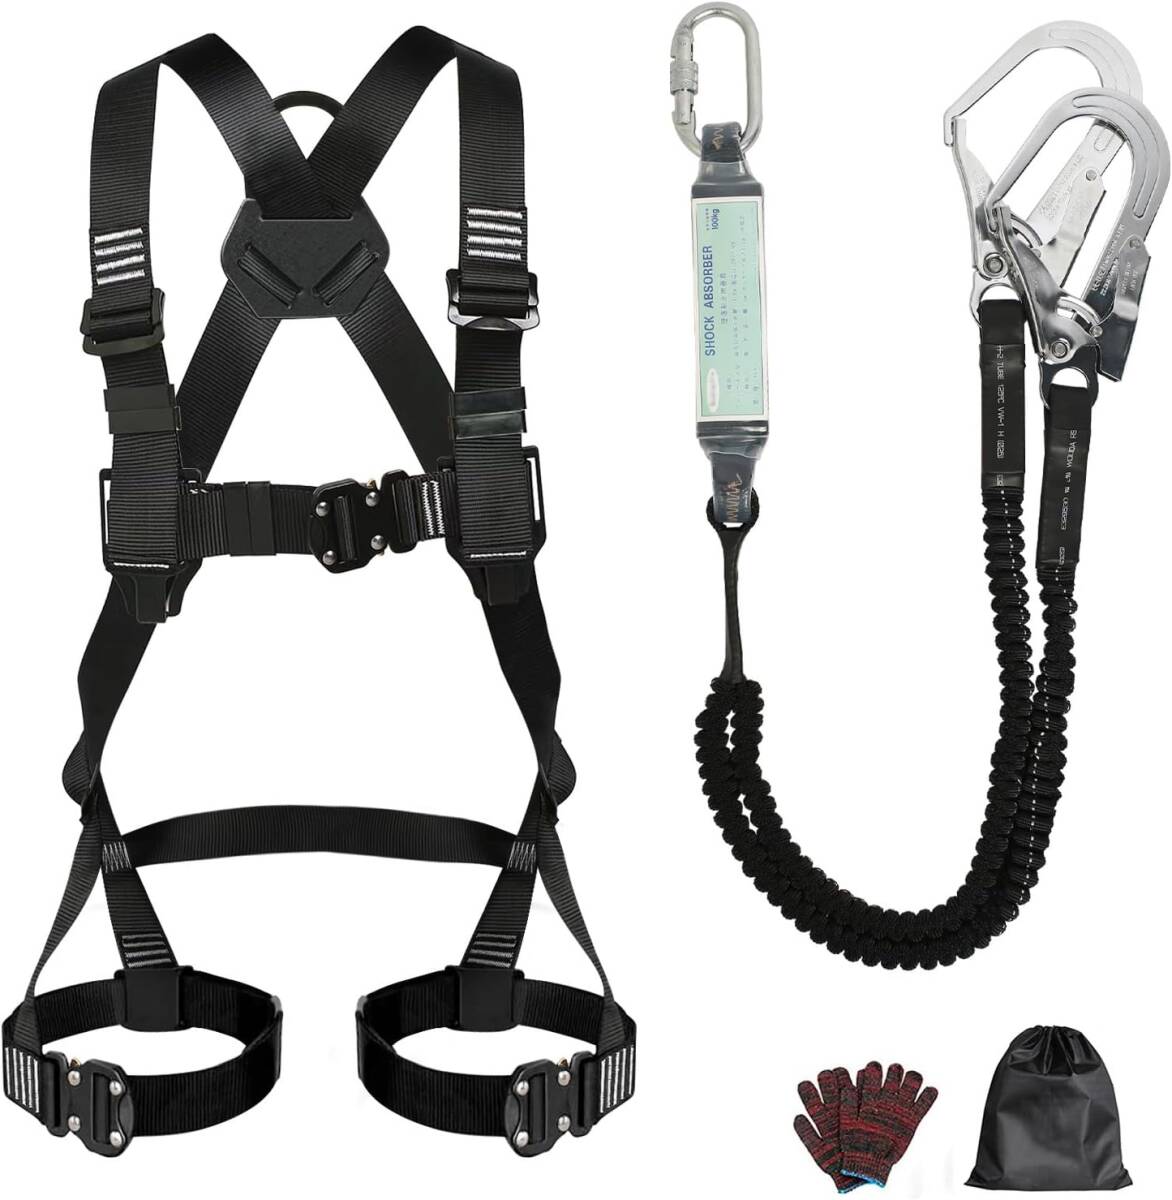 [winfull] [2022 new standard conform ] full Harness safety belt new standard set .. system stop for apparatus flexible type double Ran yard shock Abu 